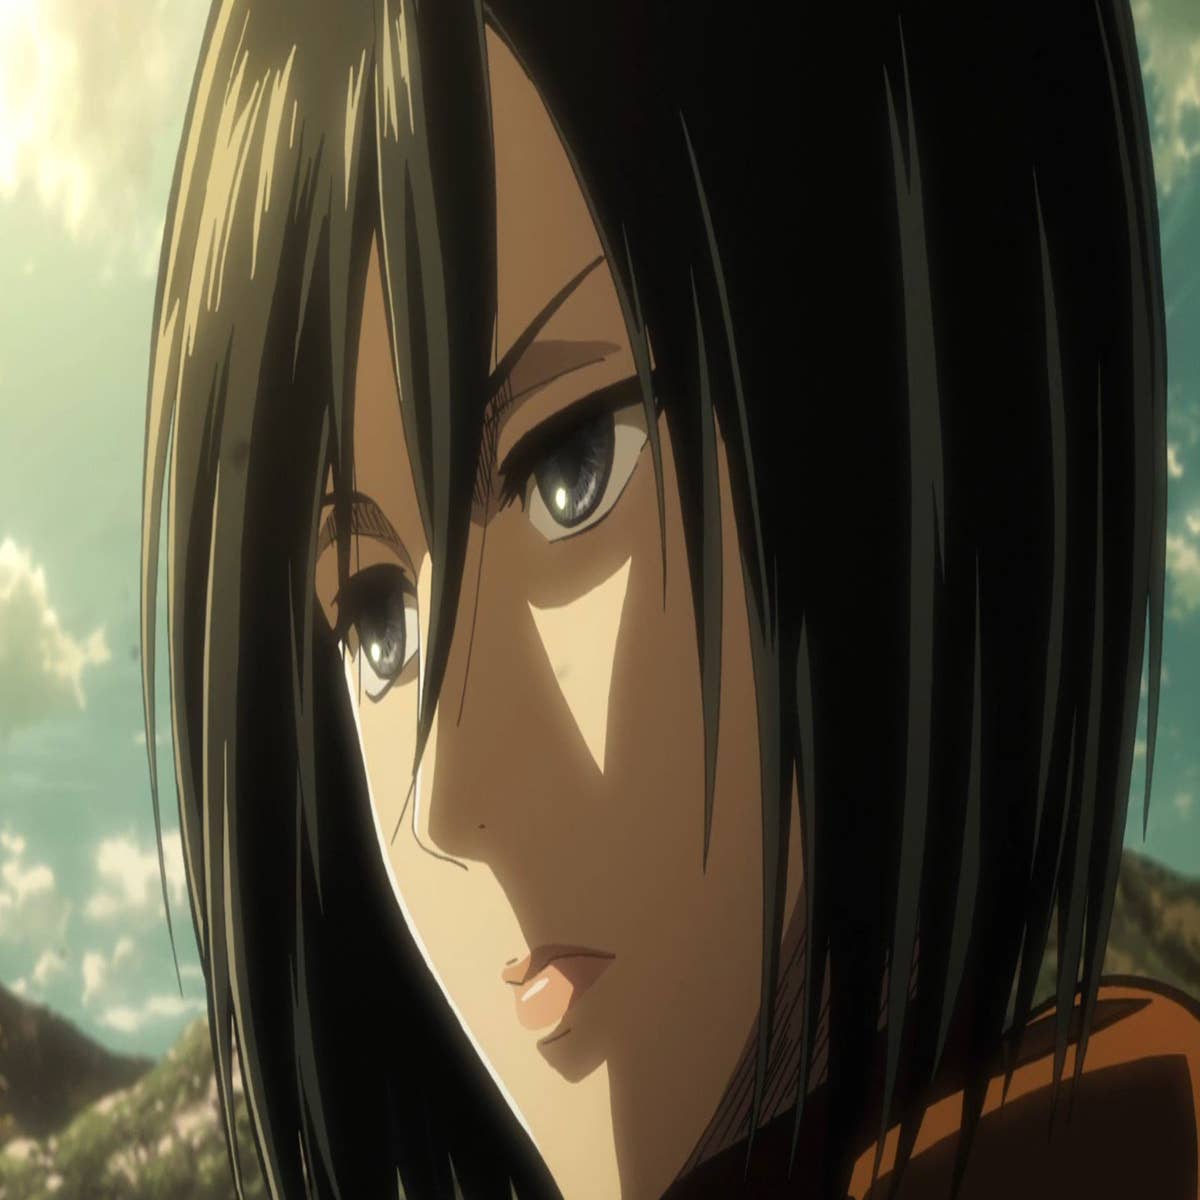 Attack on Titan watch order: How to watch all of the AoT anime in order  (and which order you should watch in!)